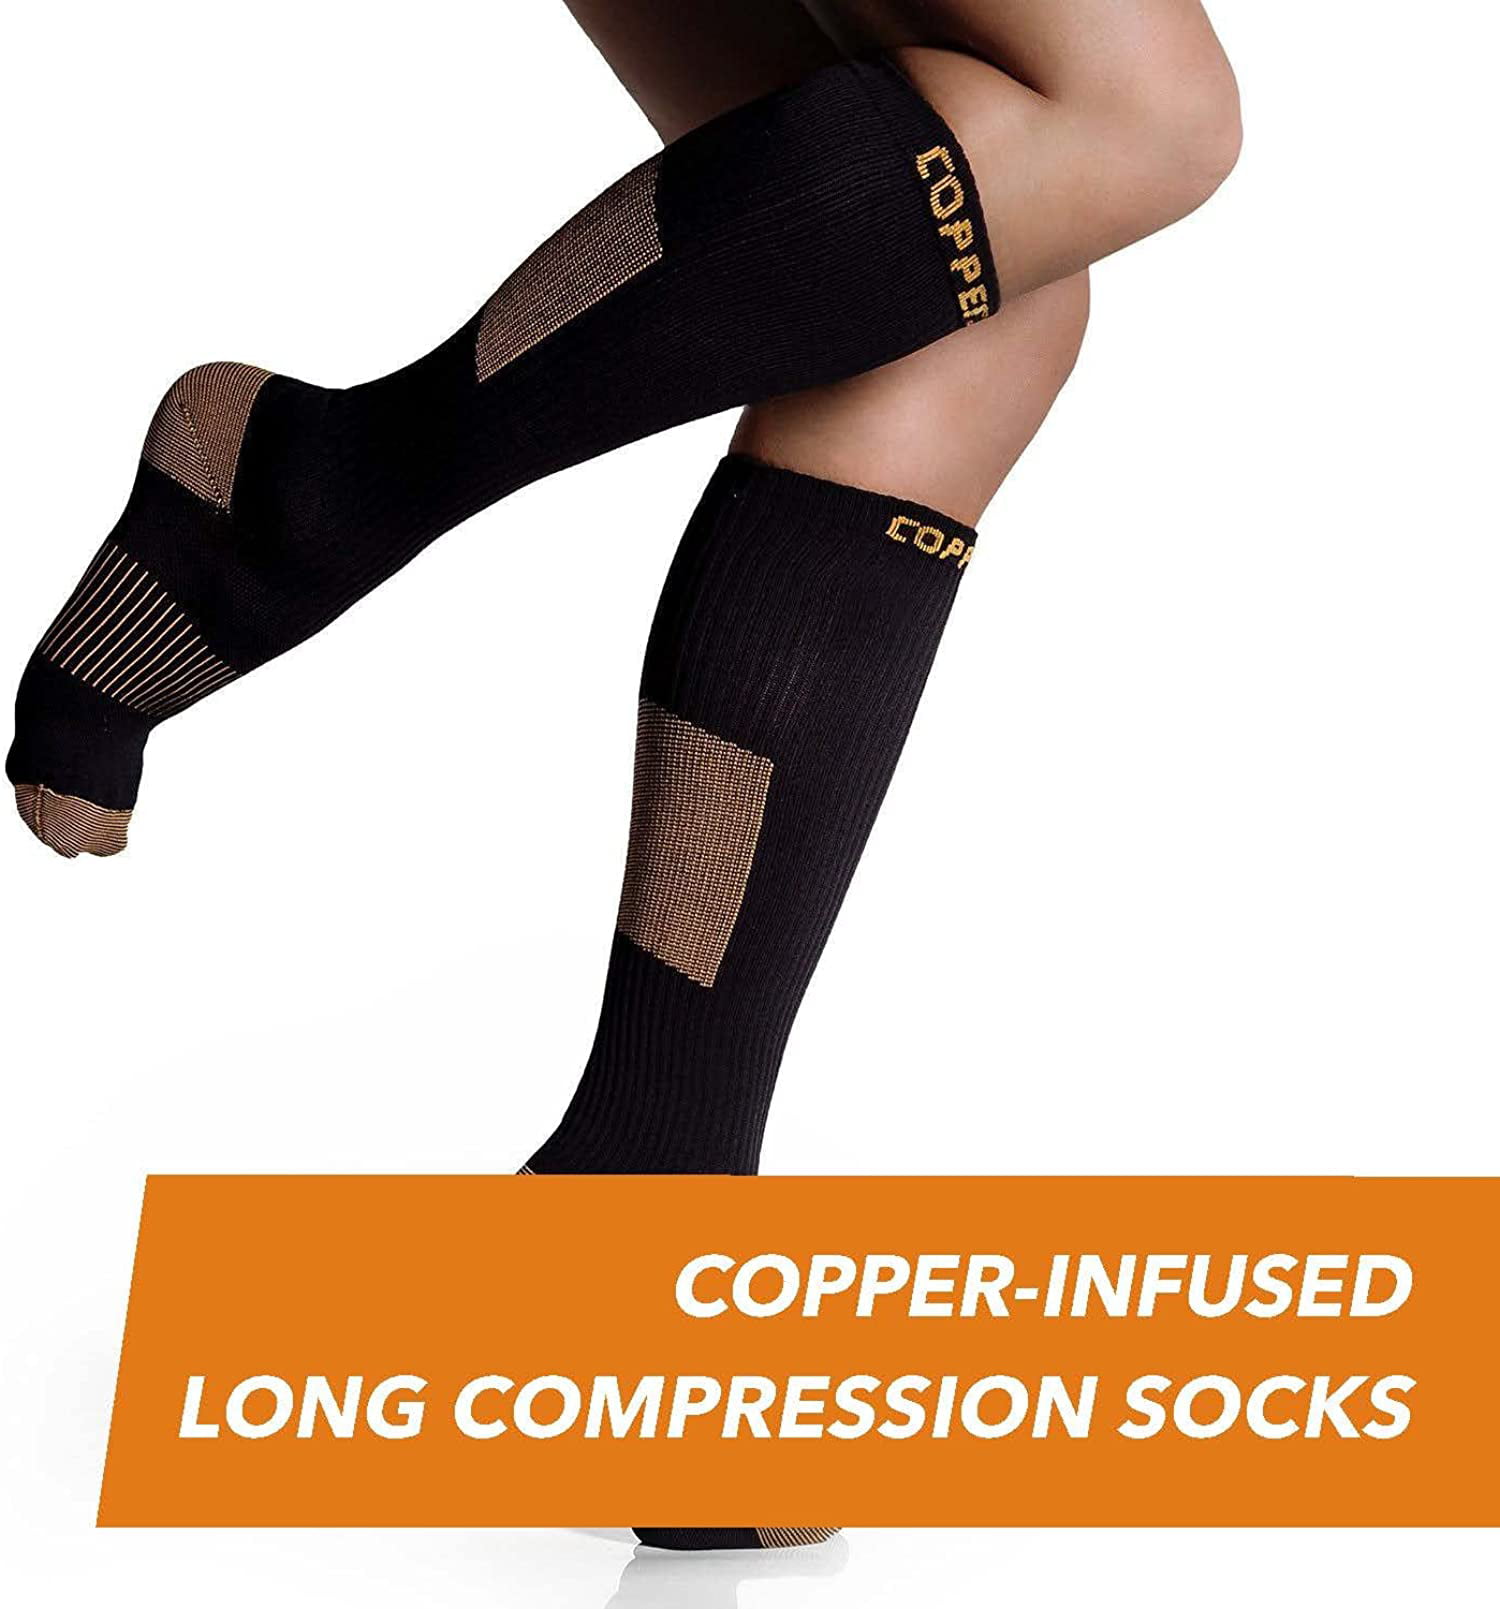 CopperJoint Long Compression Socks - Copper-Infused and Durable Design ...